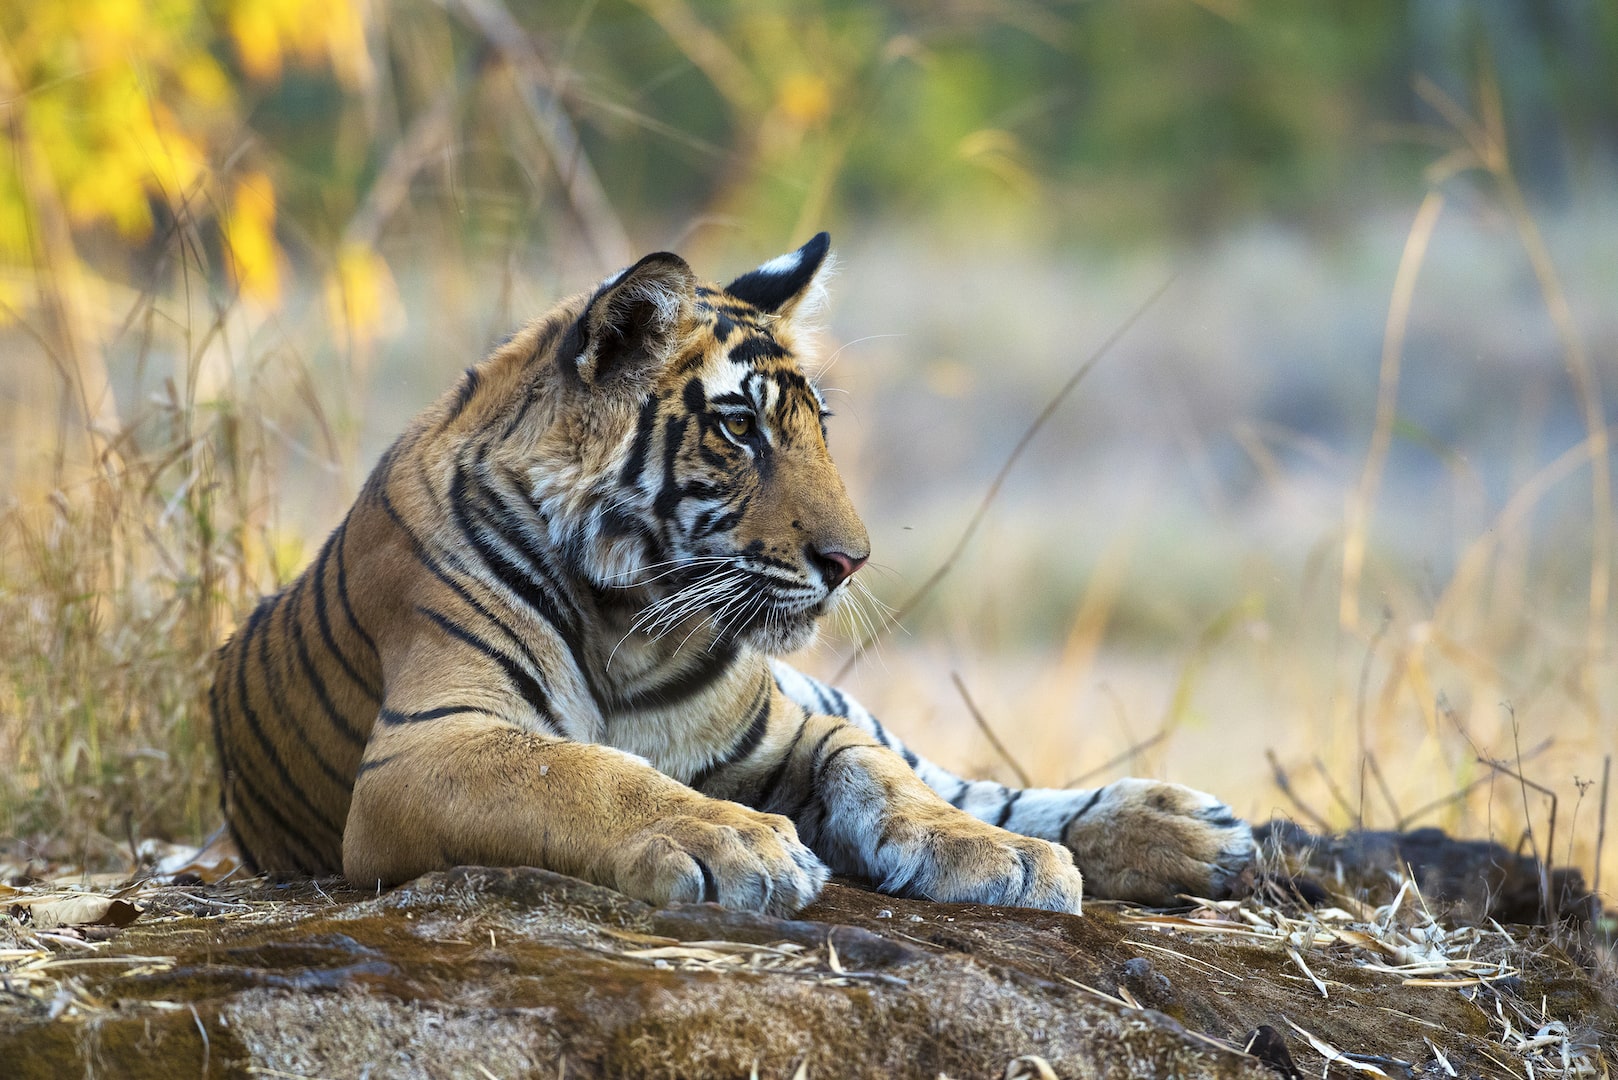 Bandipur Tiger Reserve & National Park-Jungle Safari Booking-Tiger Reserve Packages-Best Tiger Safari Company in India-Indian Jungle Tour Package